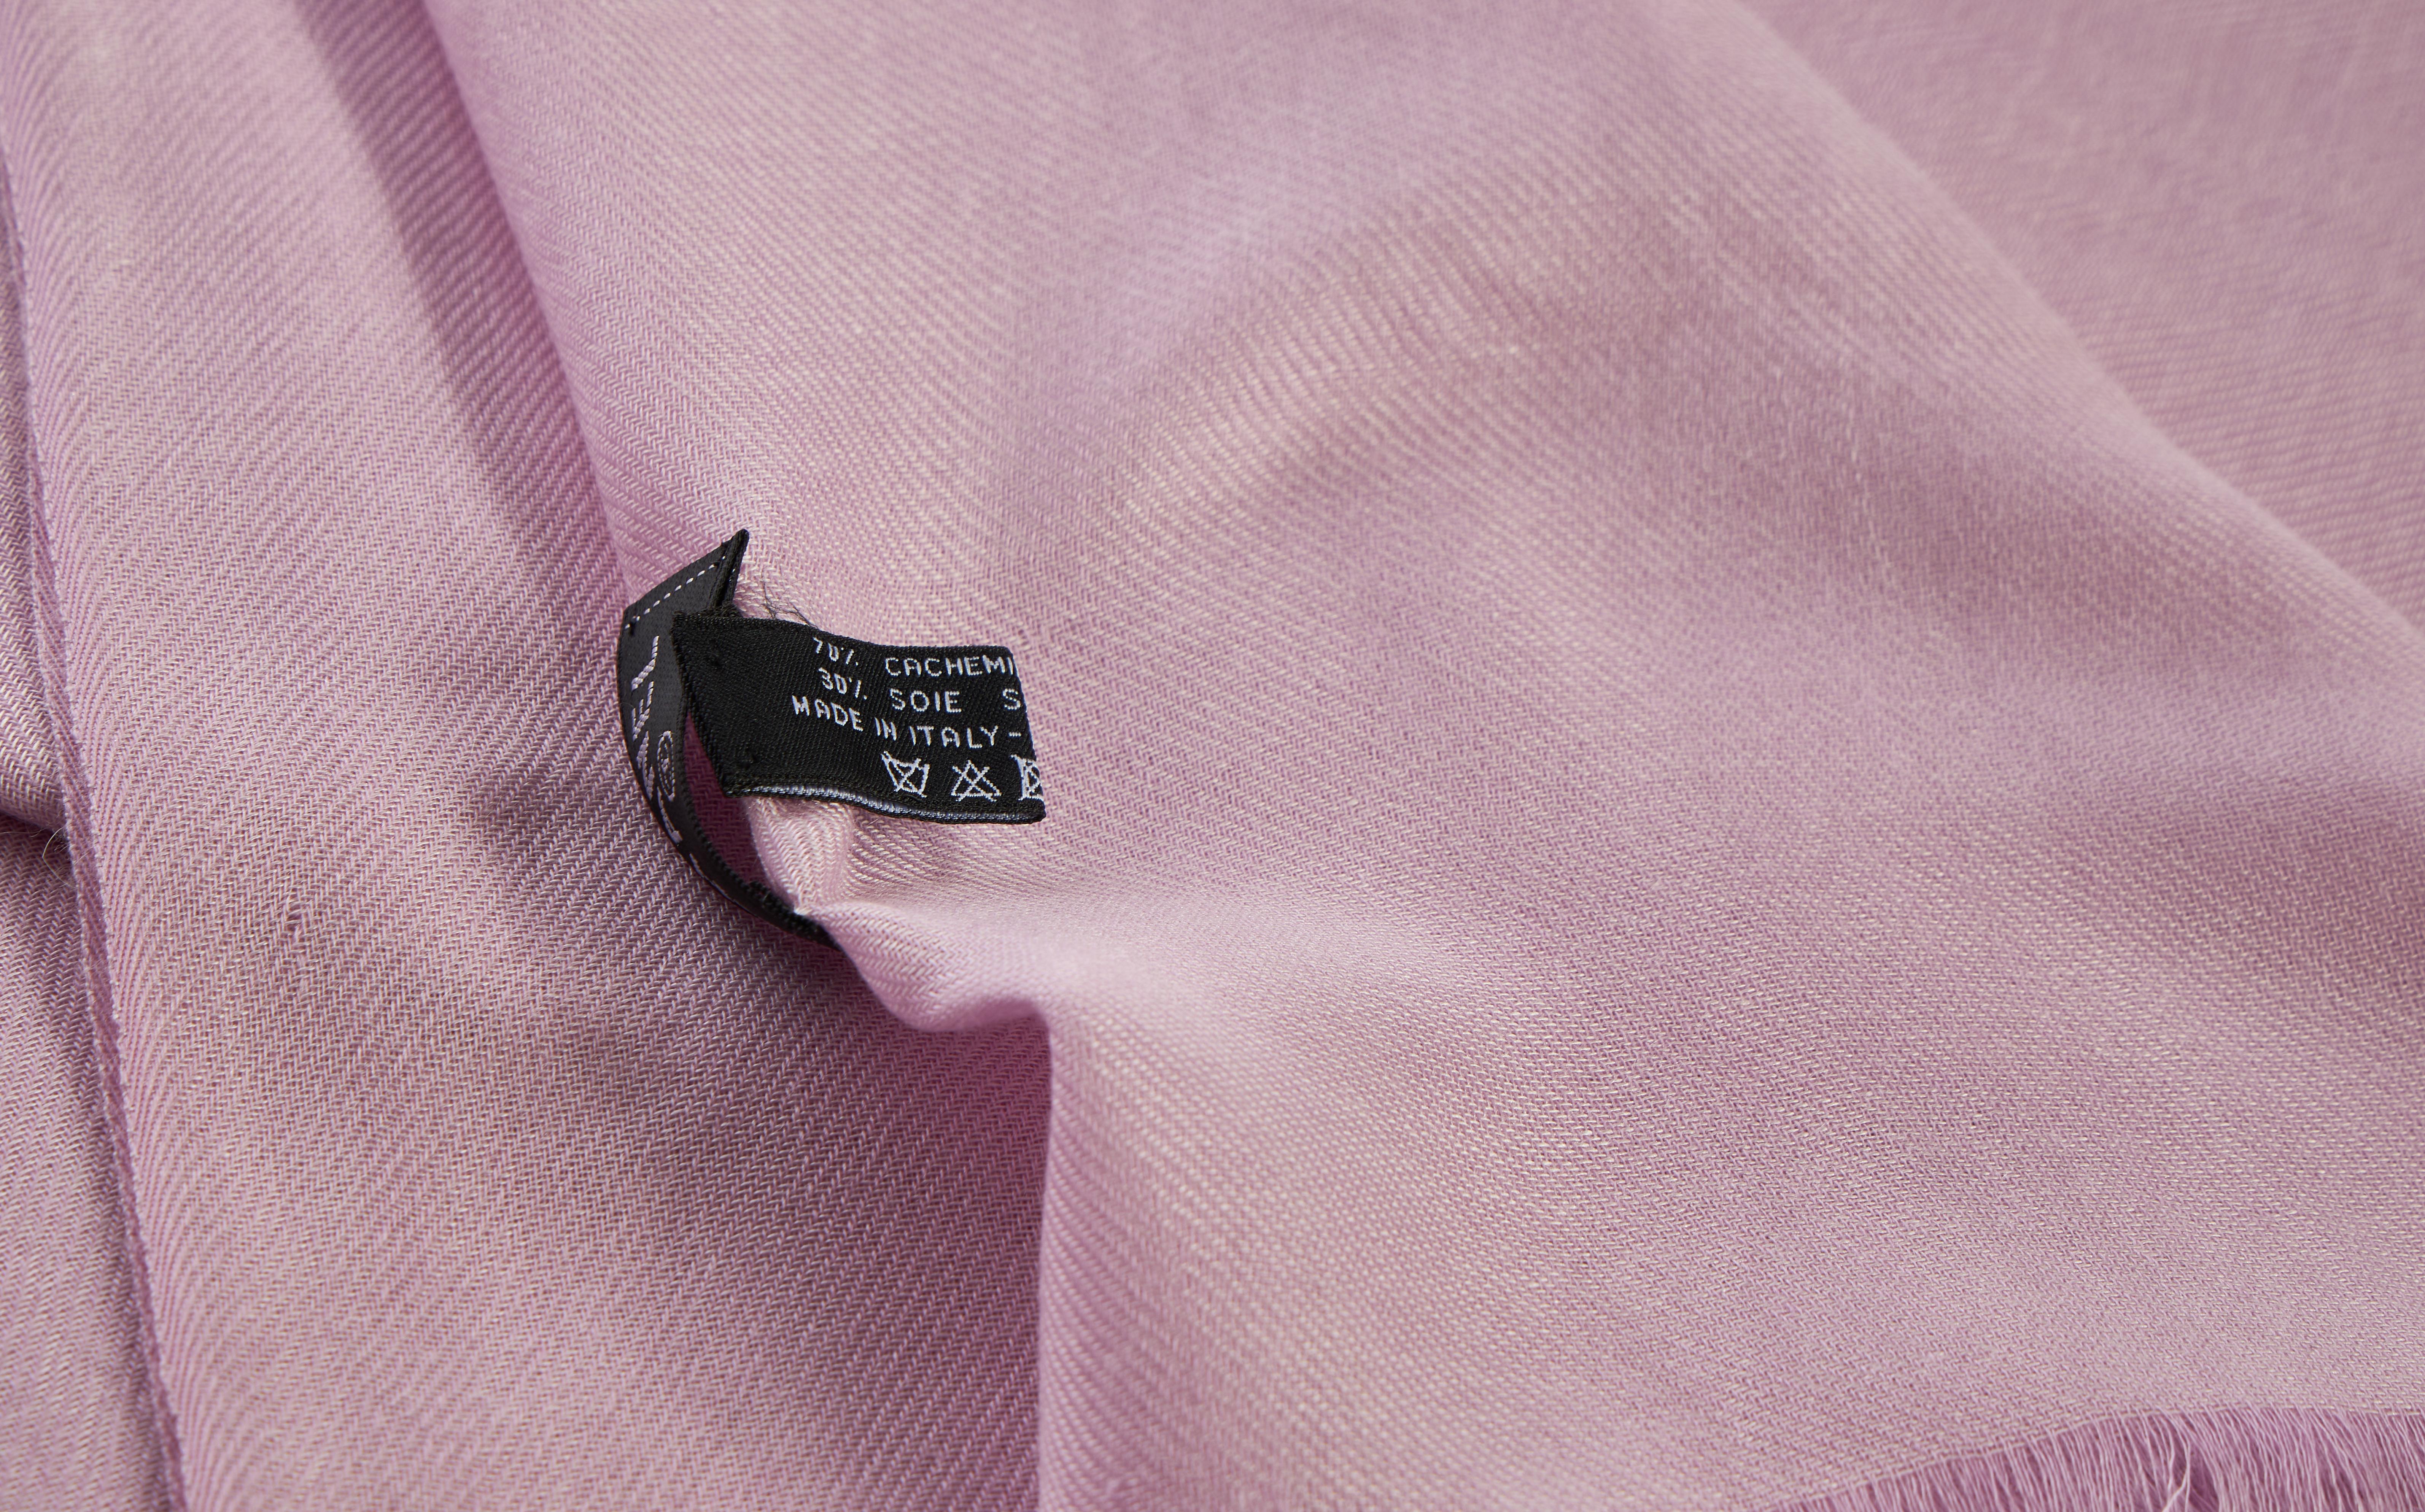 Chanel brand new pink cashmere shawl with cc embroidered logo. 70% cashmere, 30% silk. Comes with original care tag.